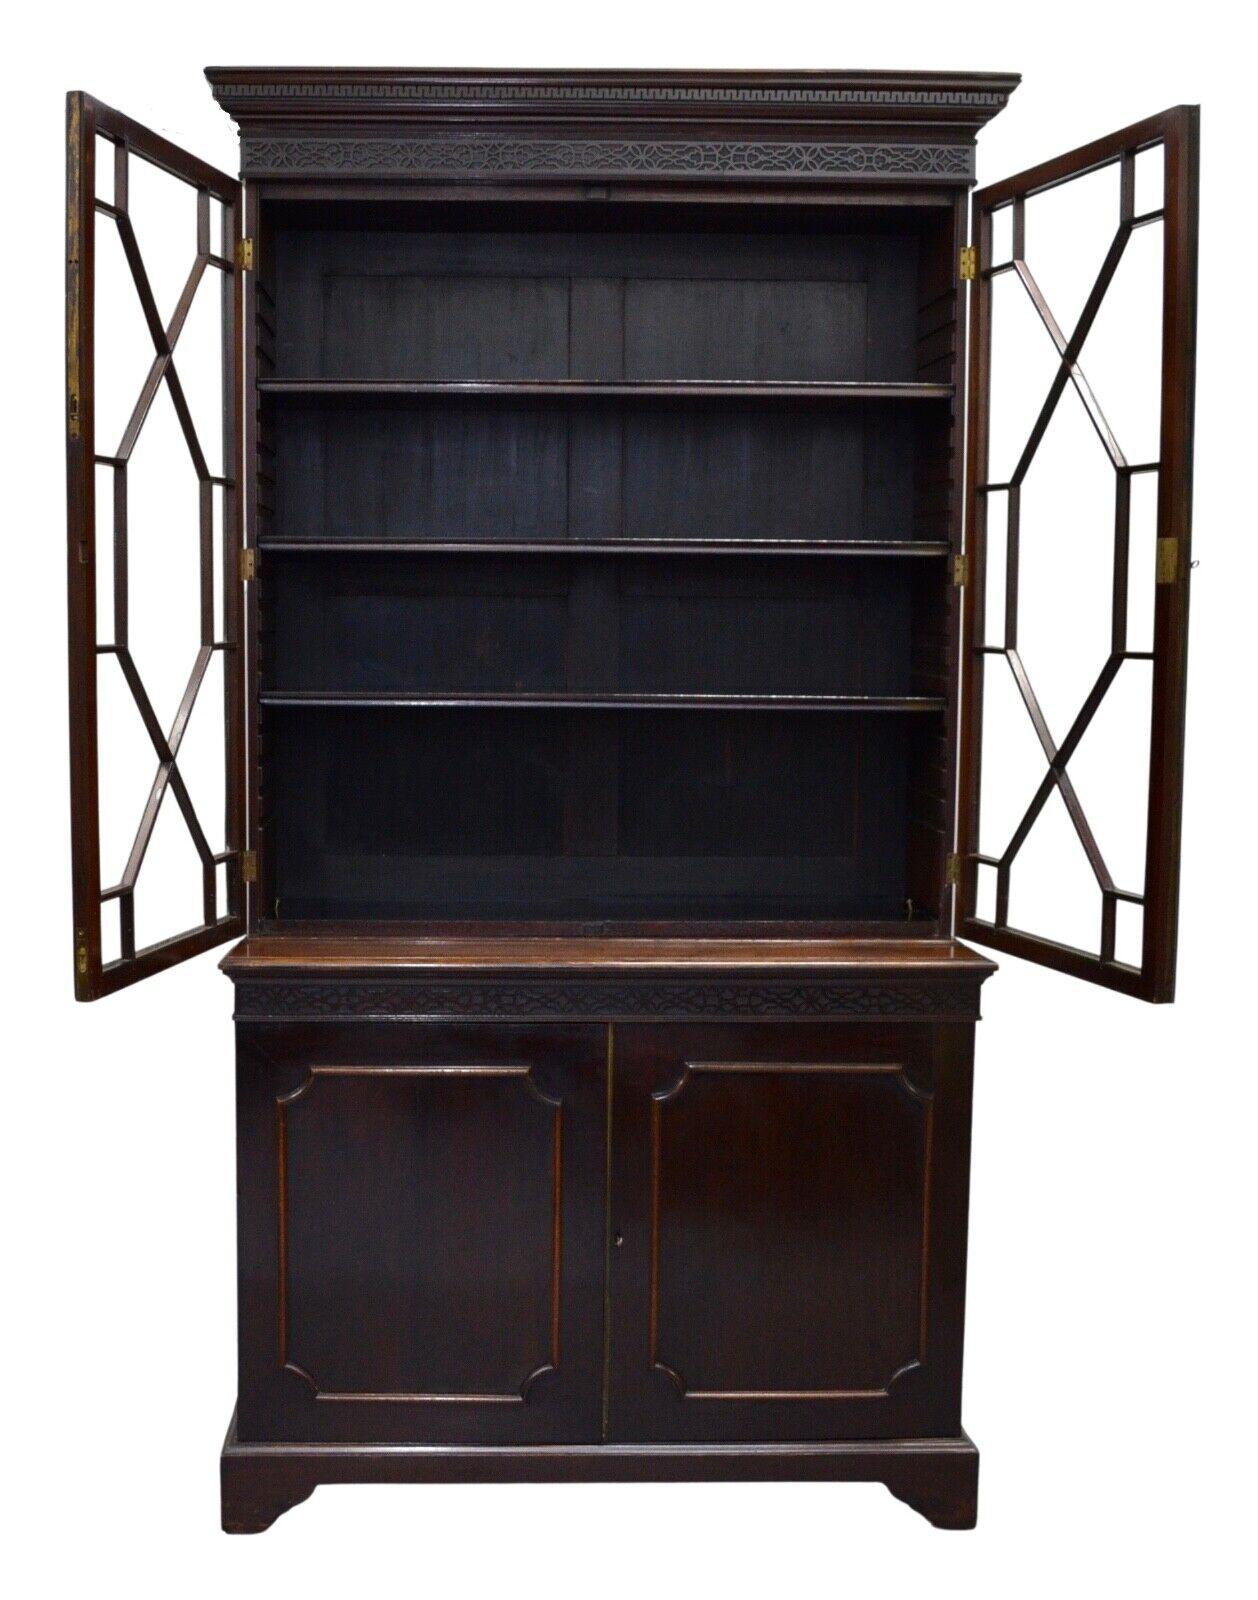 We are delighted to offer for sale this Chippendale revival english mahogany library  bookcase. It has an upper case carved molded edge cornice with detailed moldings and intricately carved fret work. The hinged glass door open revealing three